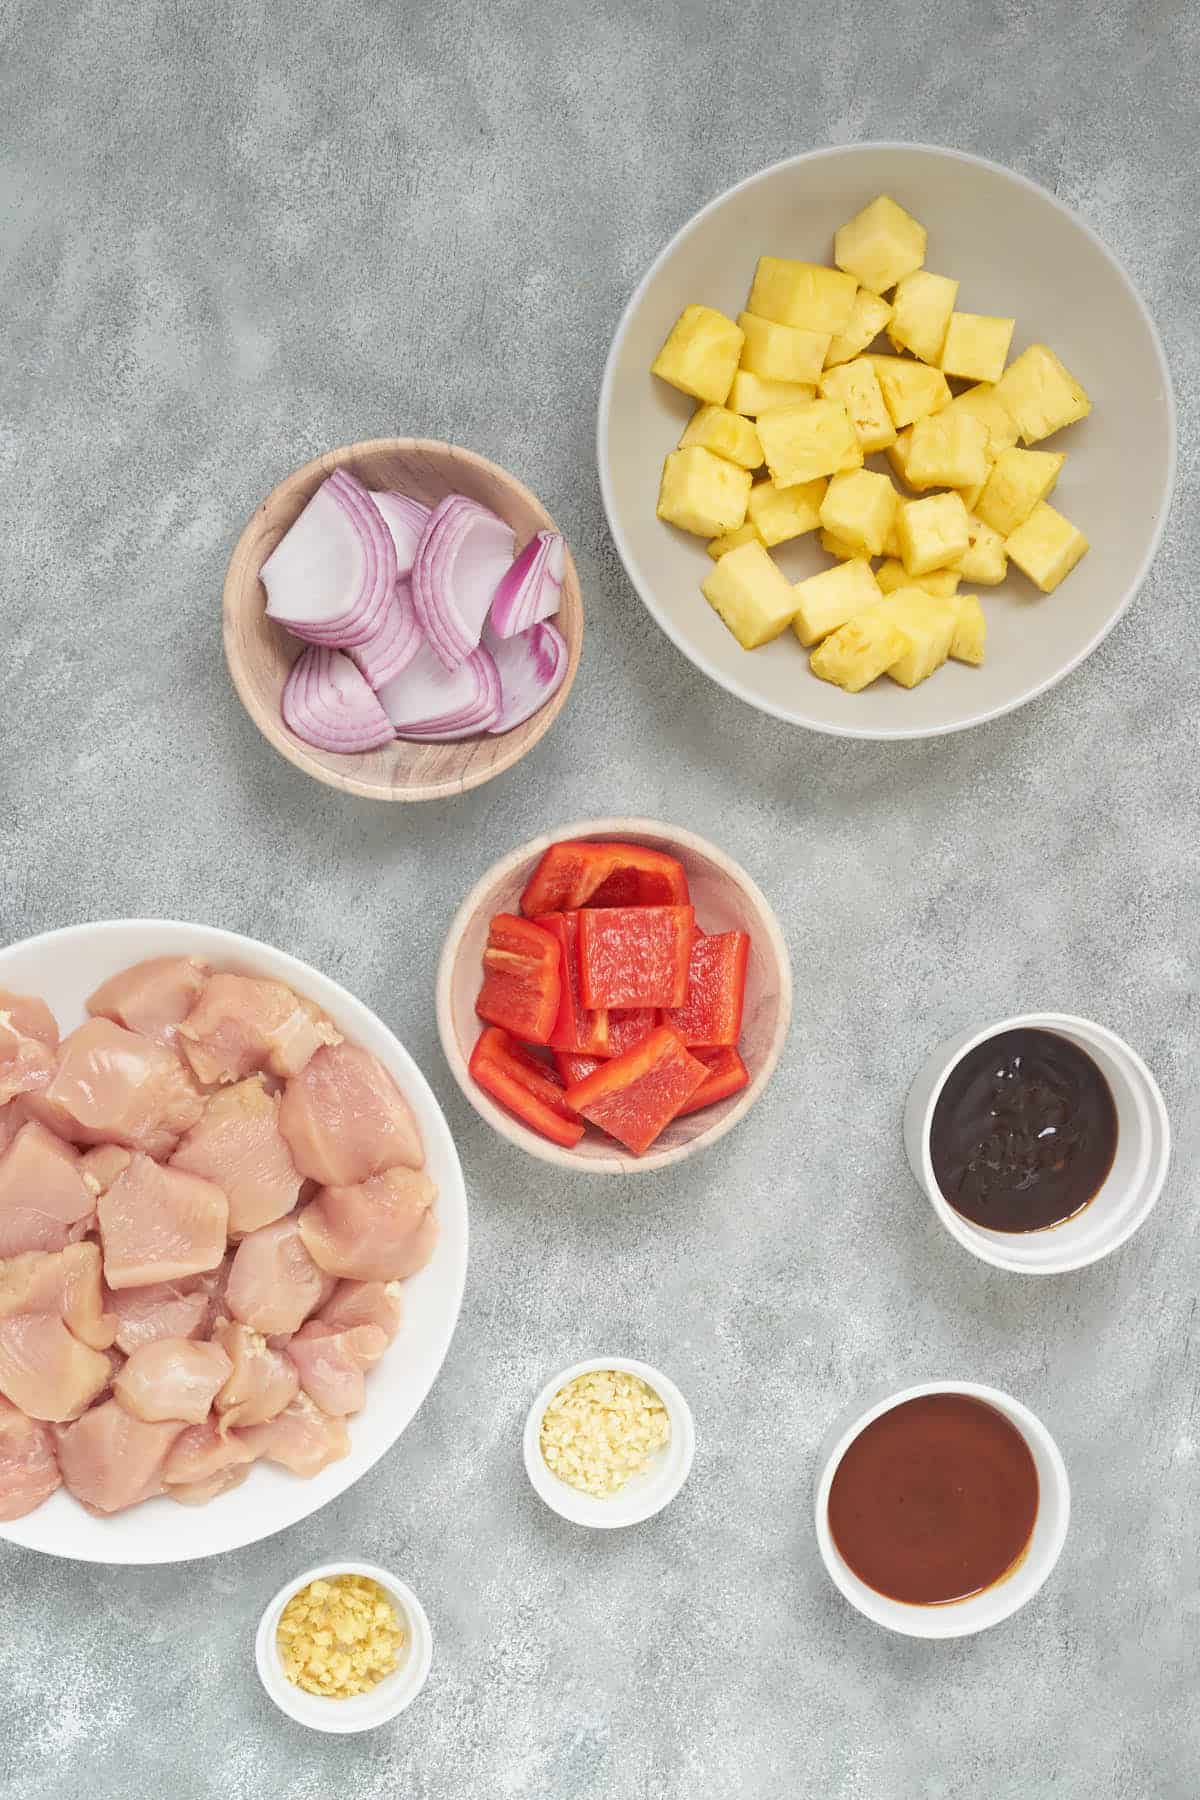 Ingredients to make chicken and pineapple kabobs.